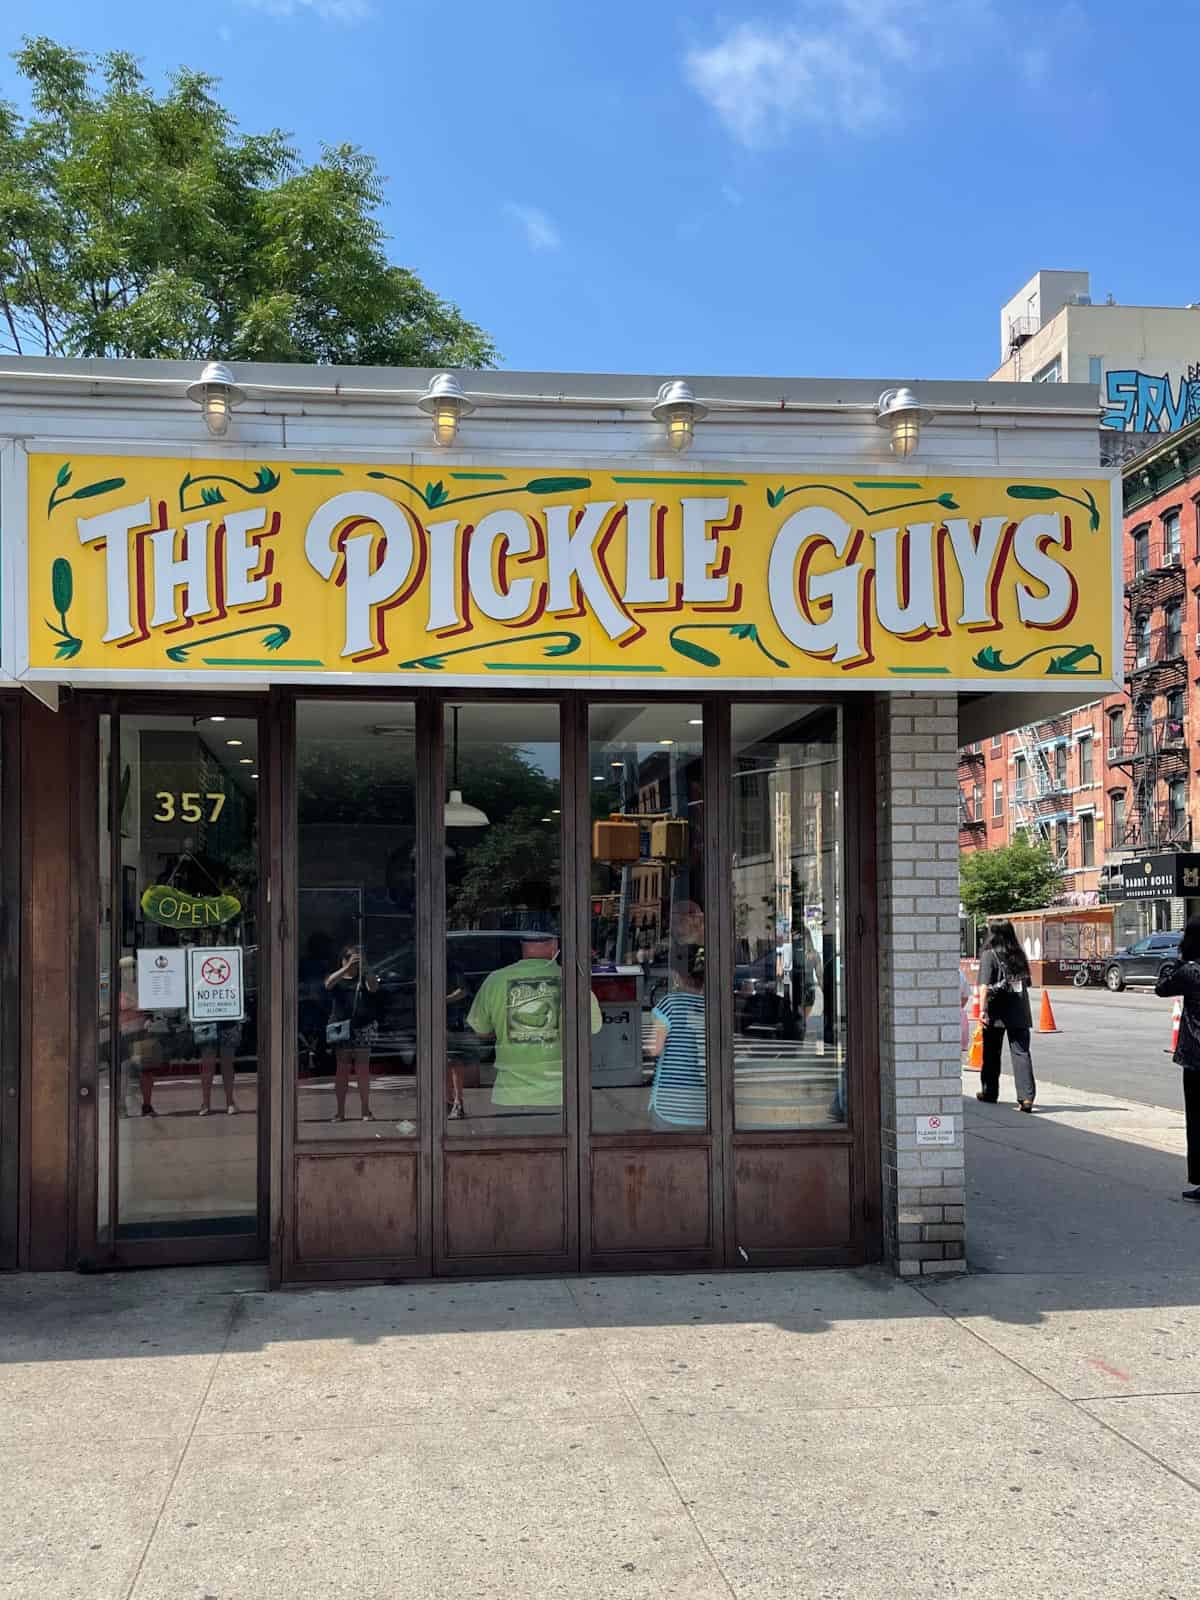 Pickle Guys storefront in NYC.